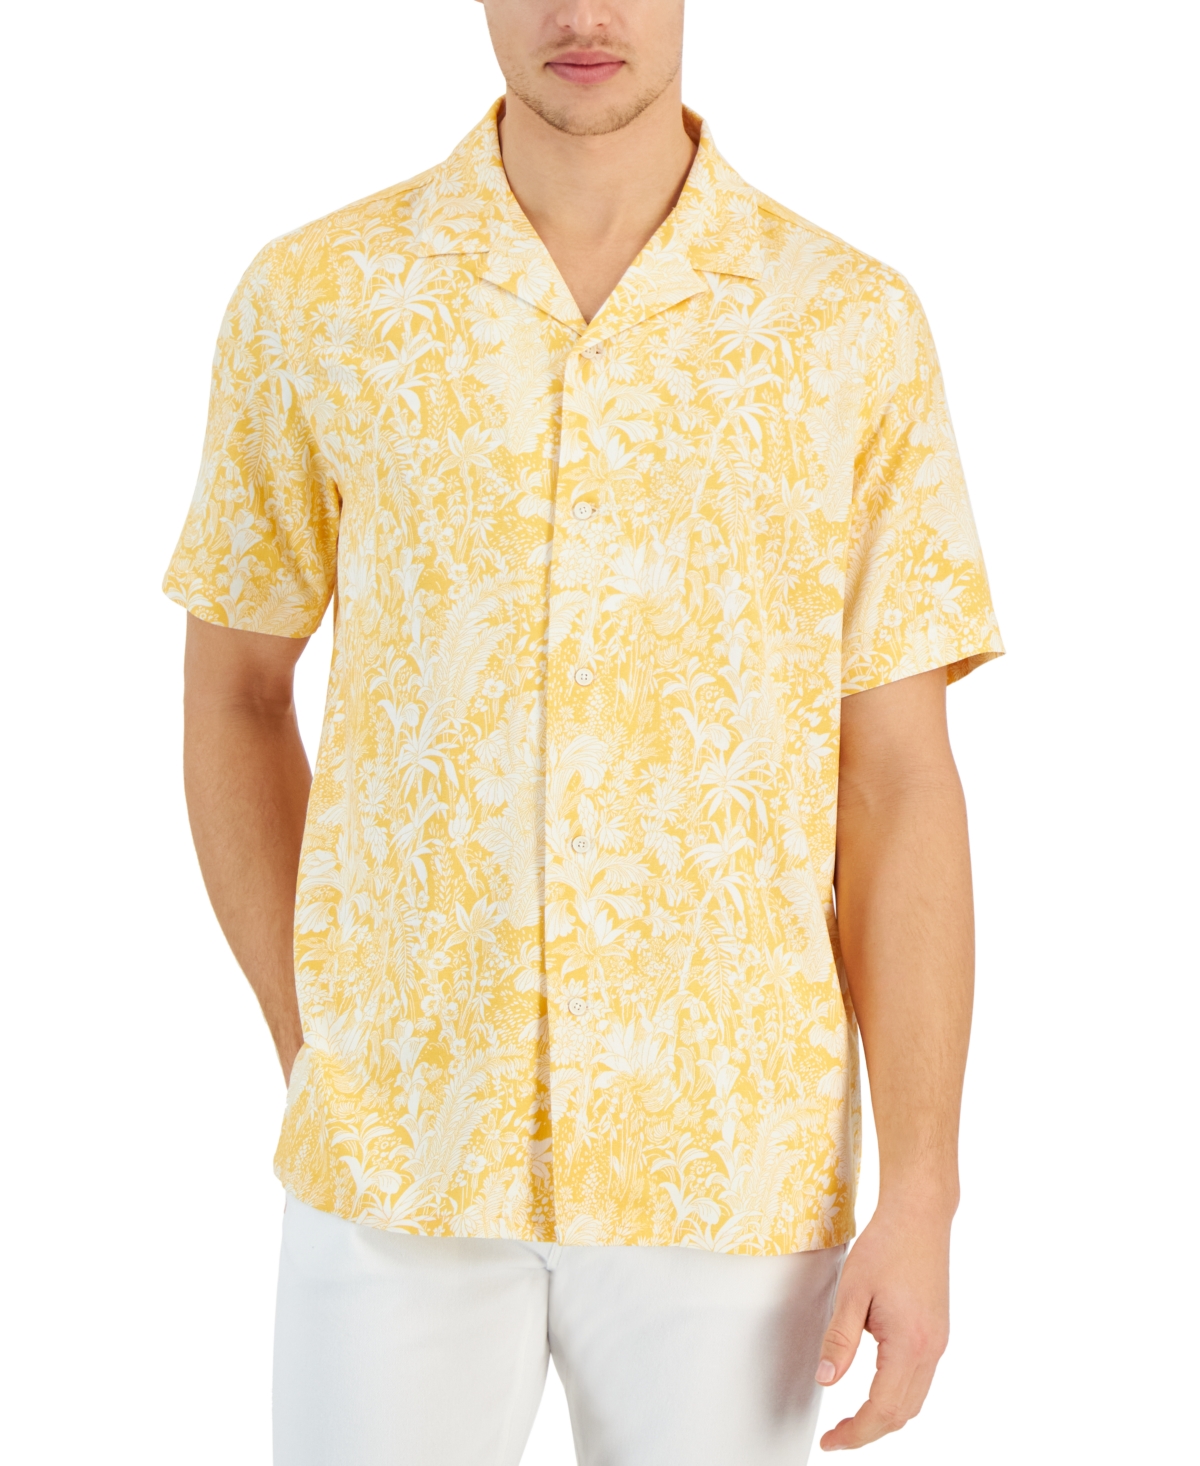 Men's Regular-Fit Tropical-Print Button-Down Camp Shirt, Created for Macy's - Mostrich